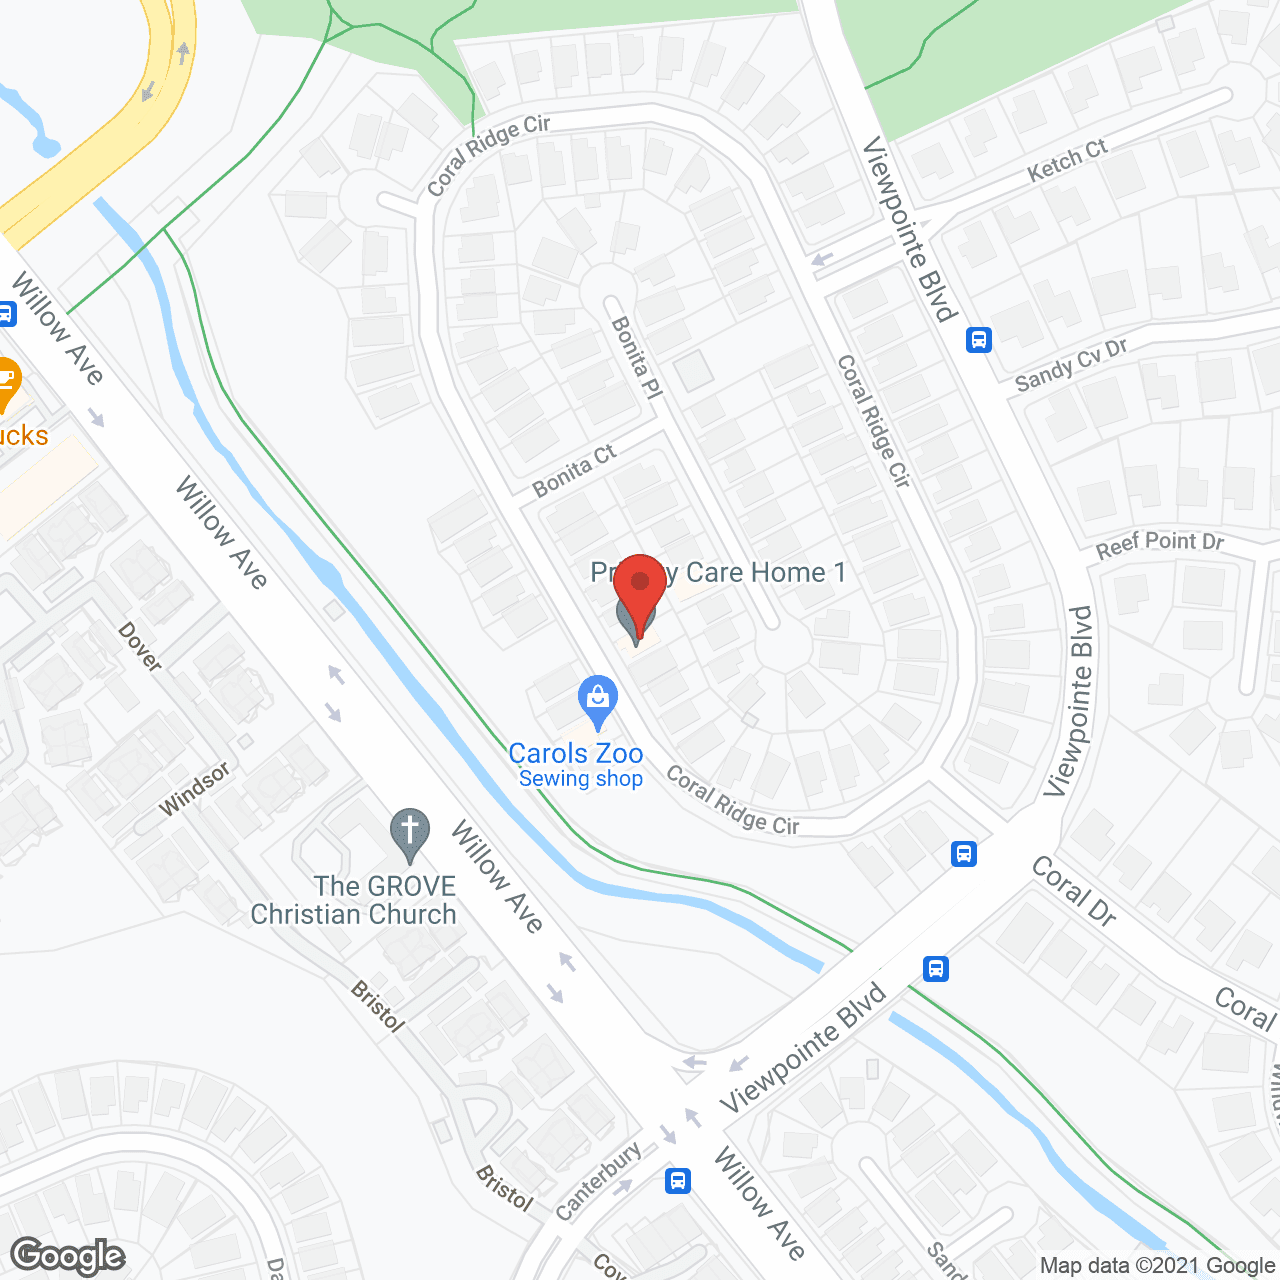 Priority Care Home 1 in google map